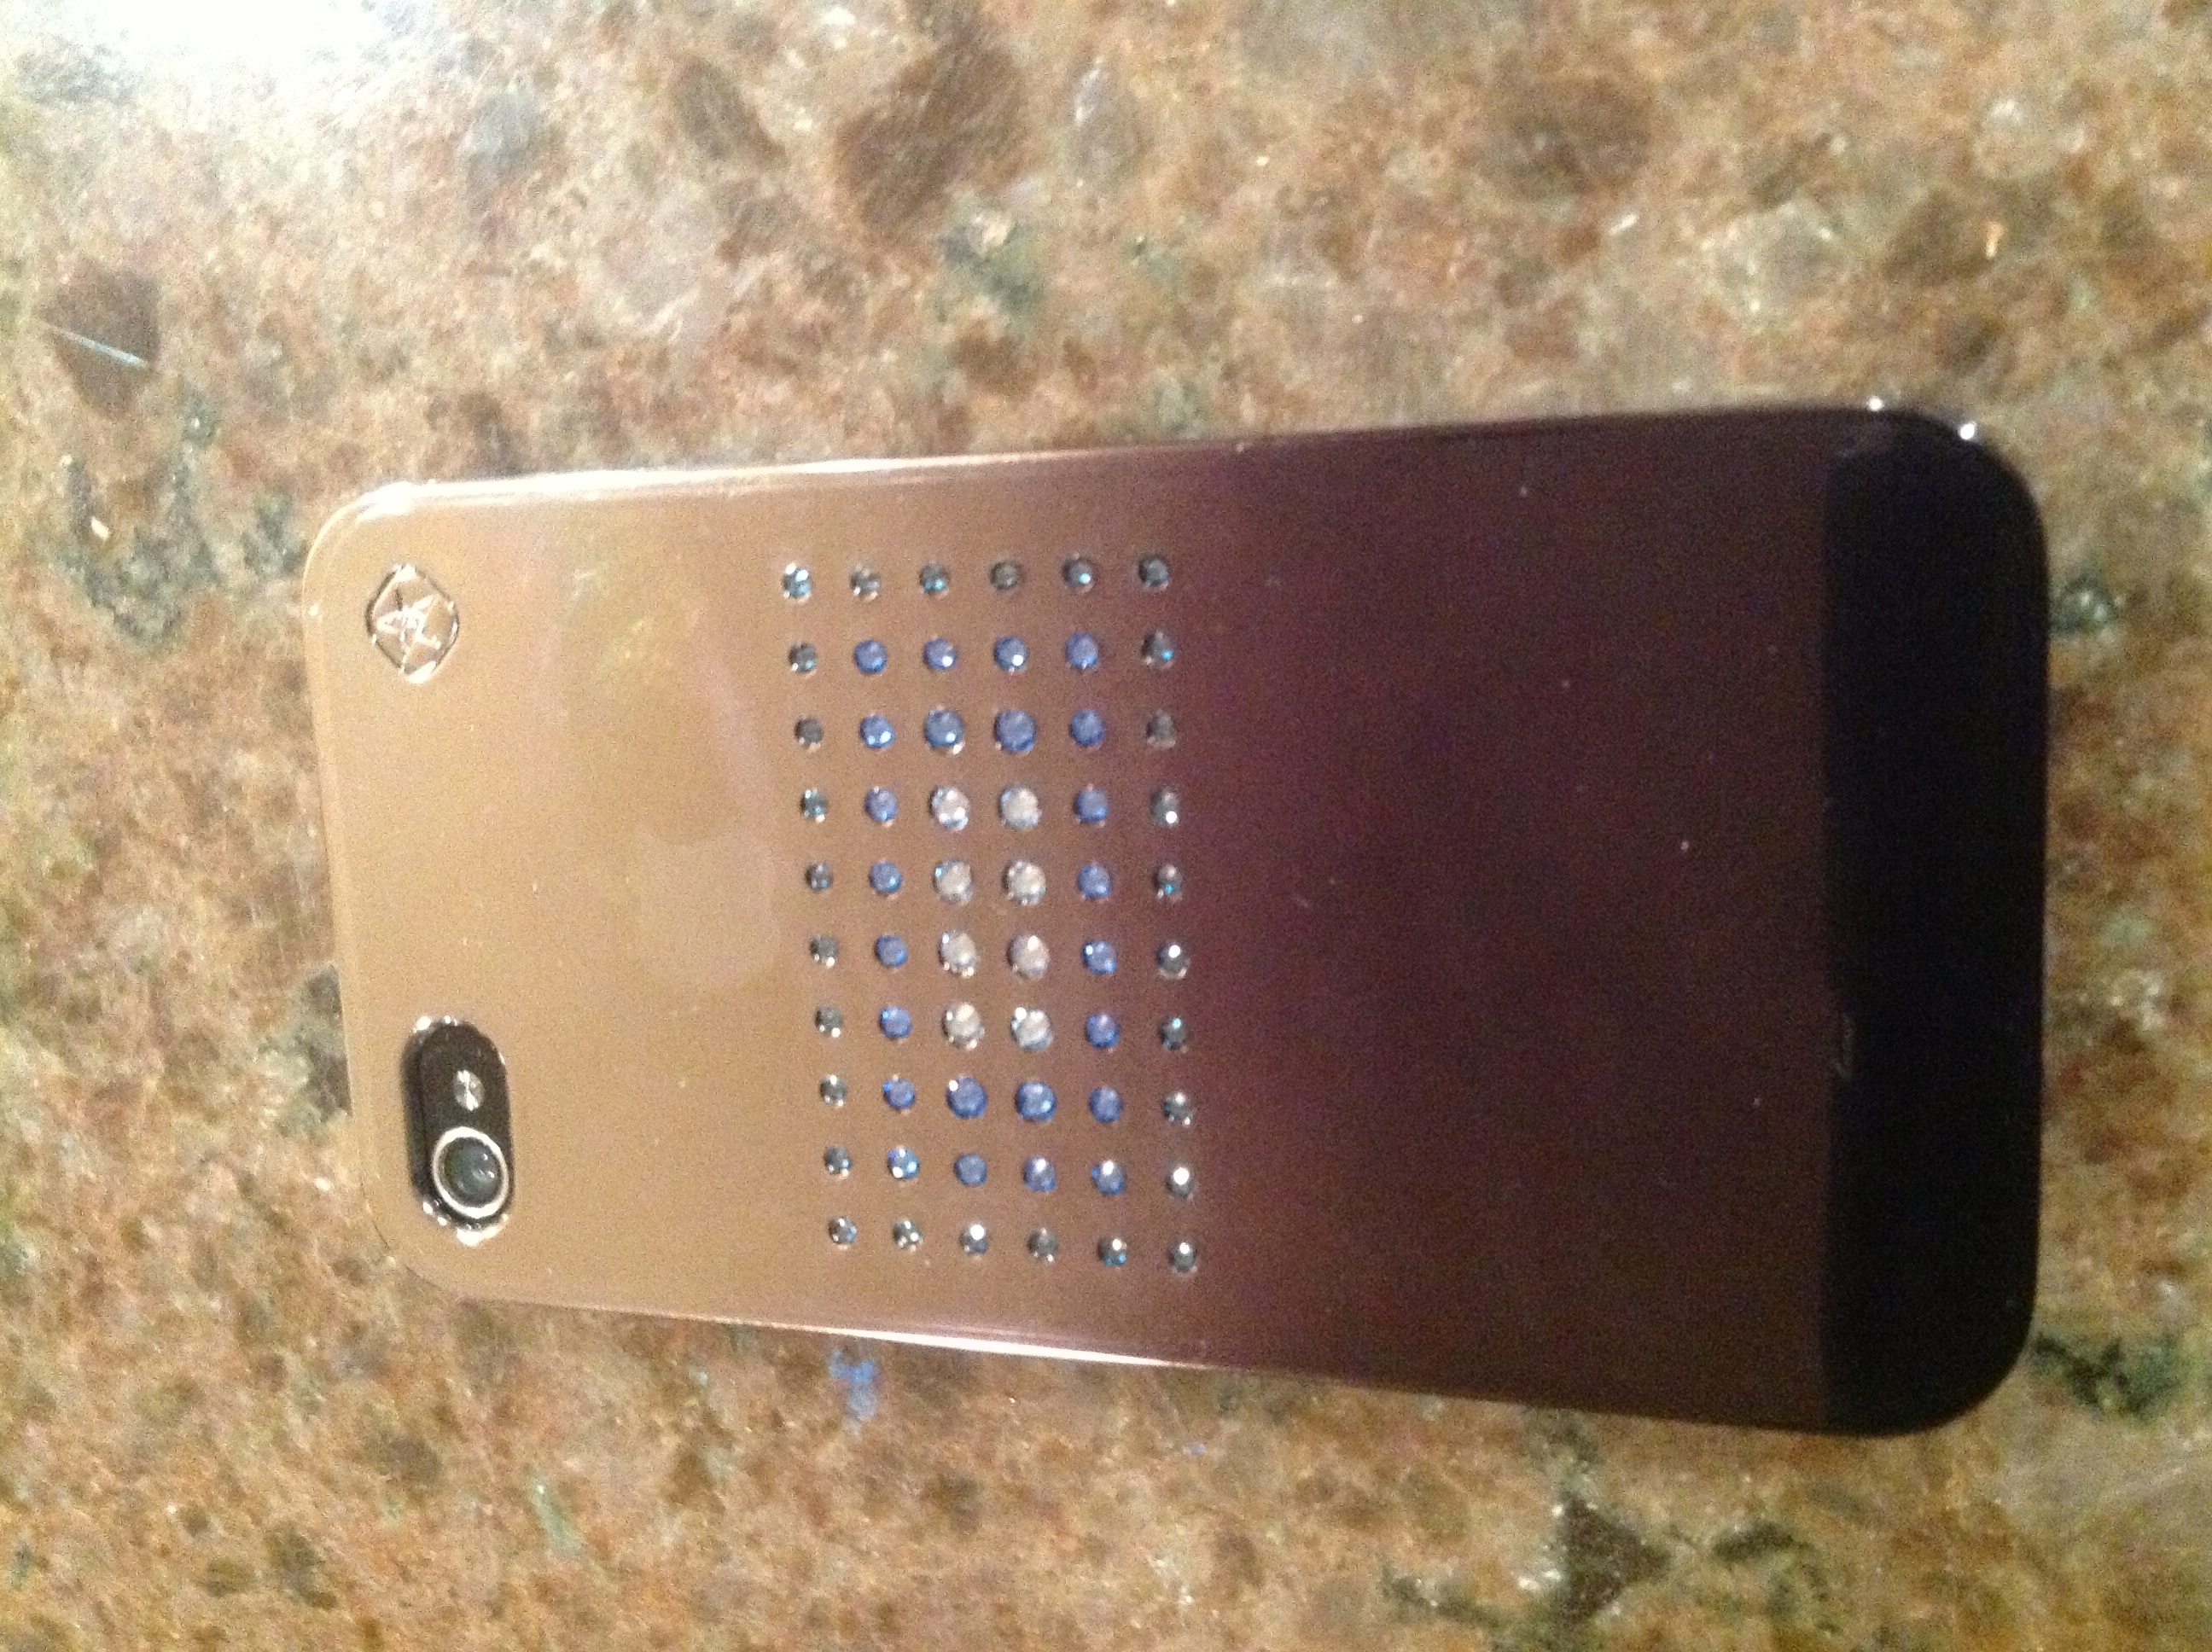 Bling My Thing's Dot Matrix Case for iPhone 4S Review